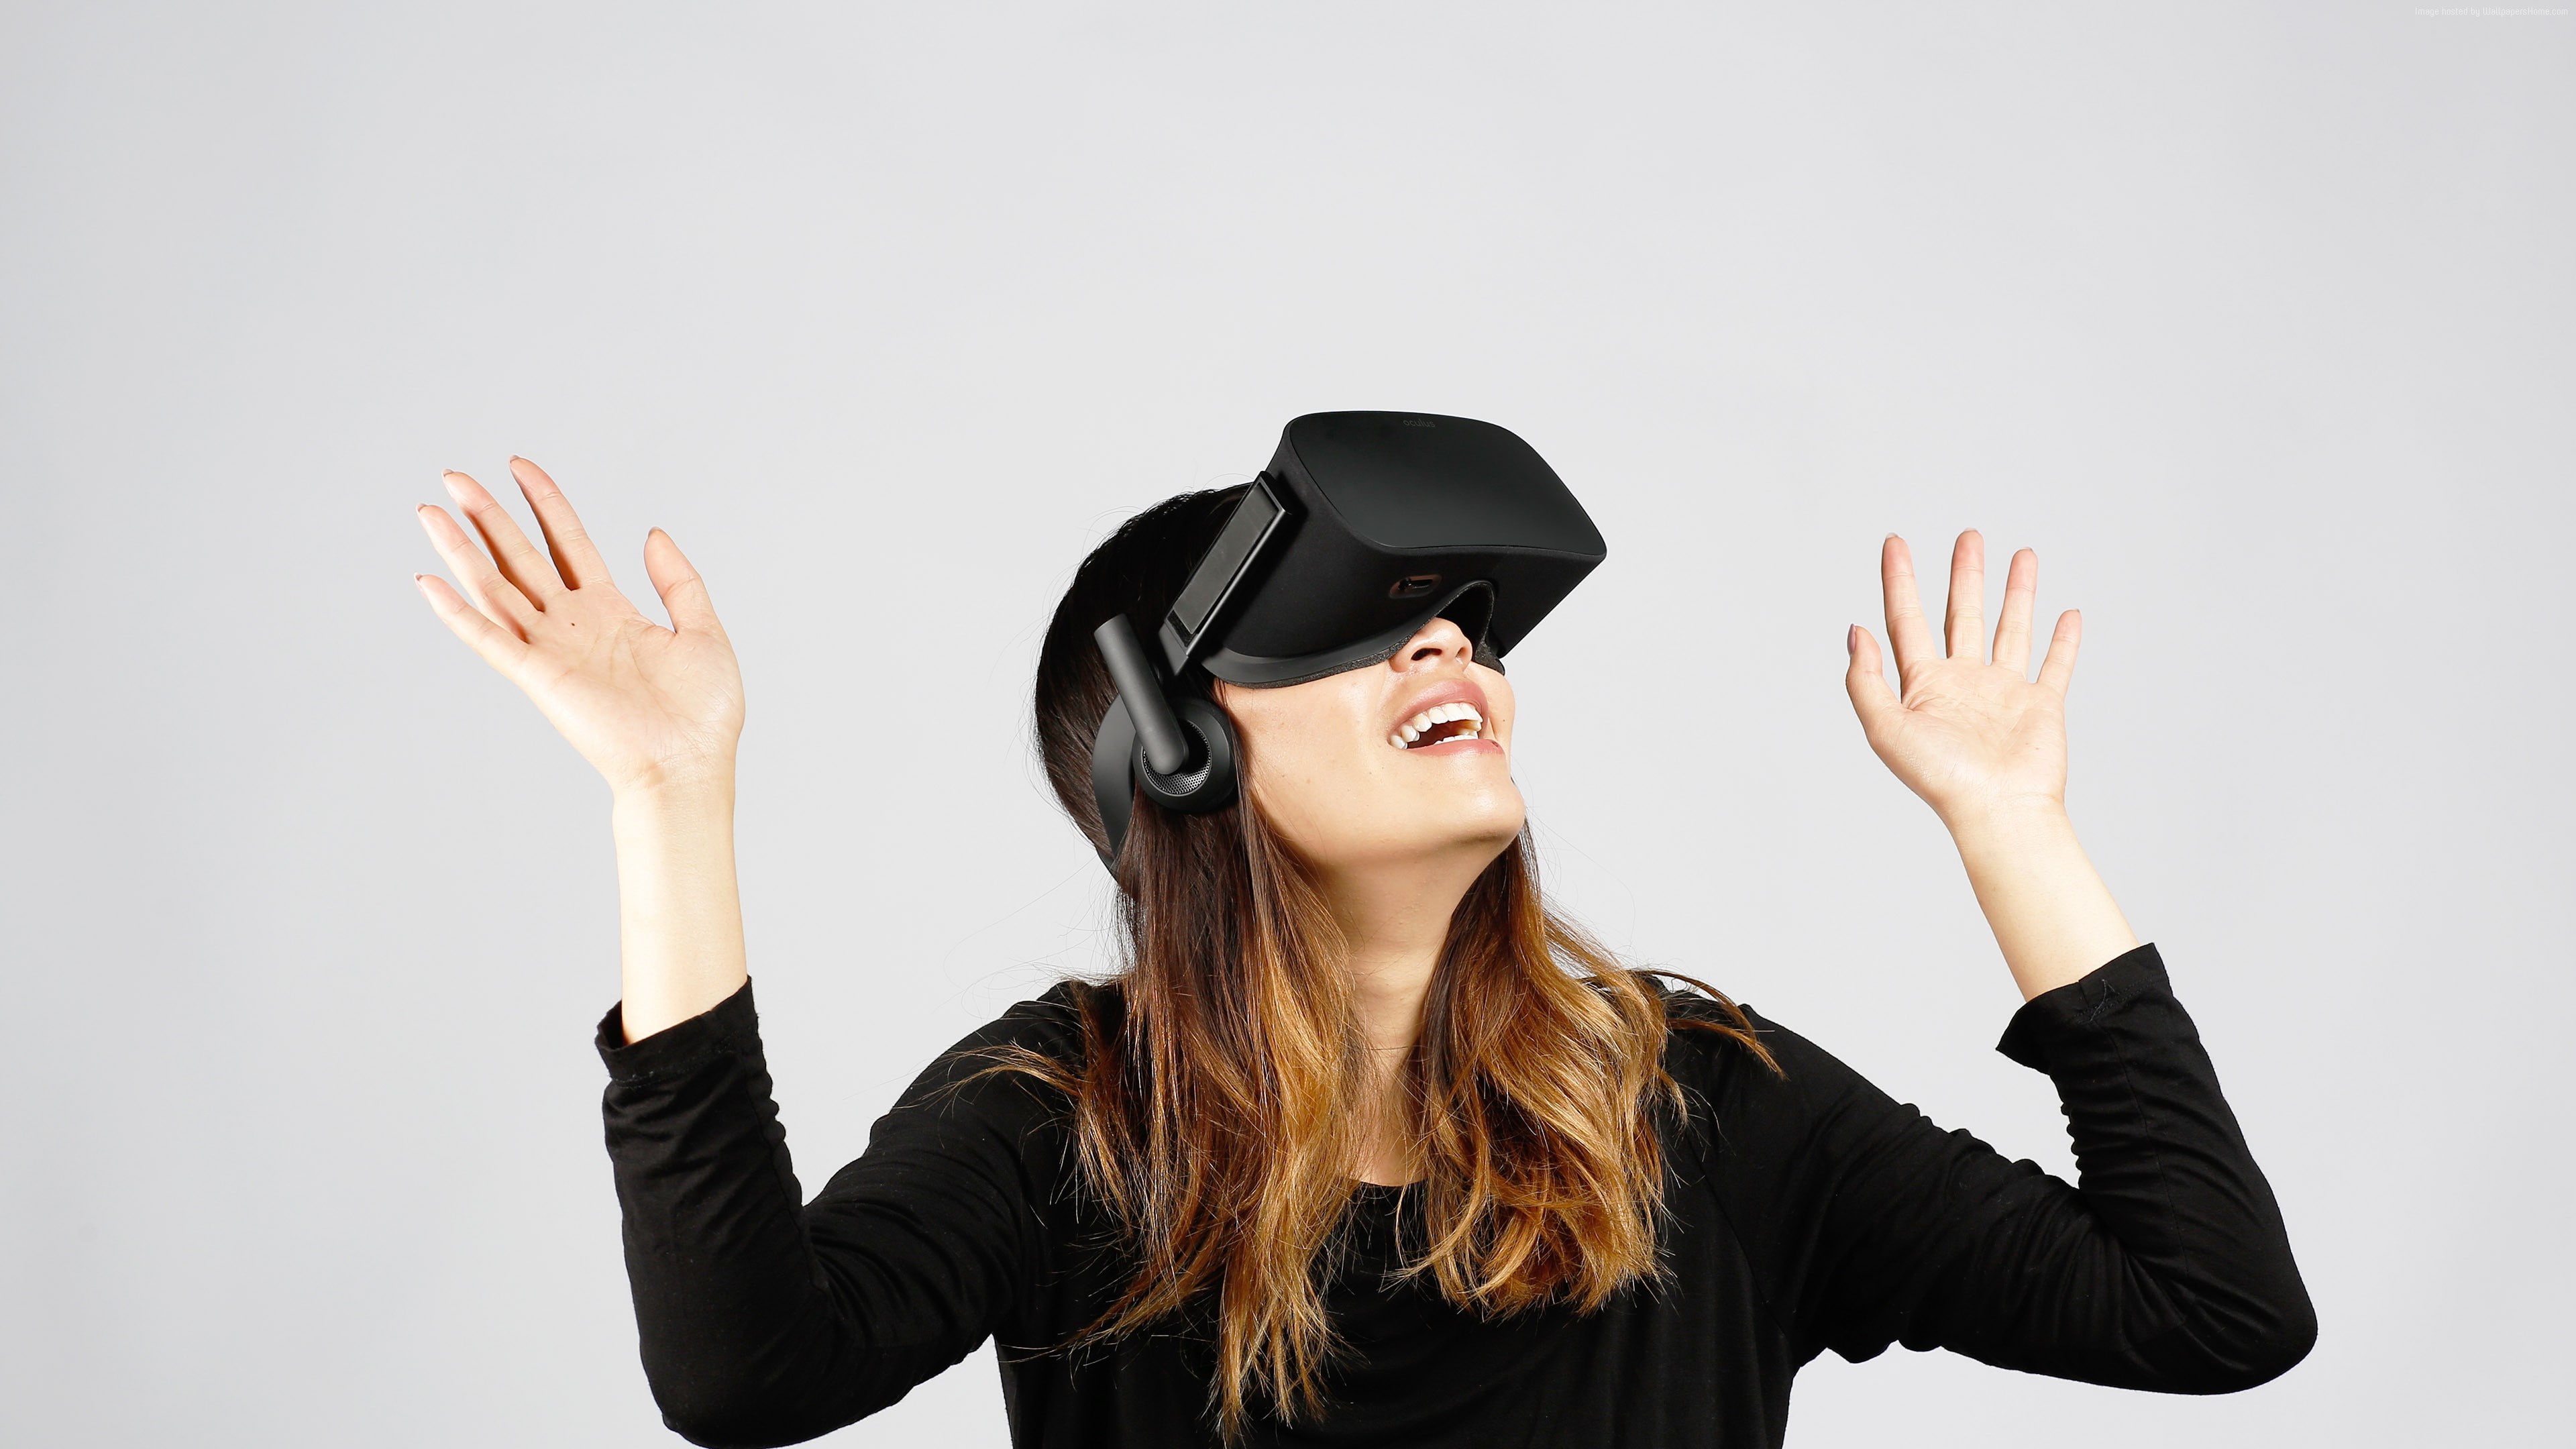 Oculus Rift, Oculus Touch, VR headset, Virtual Reality